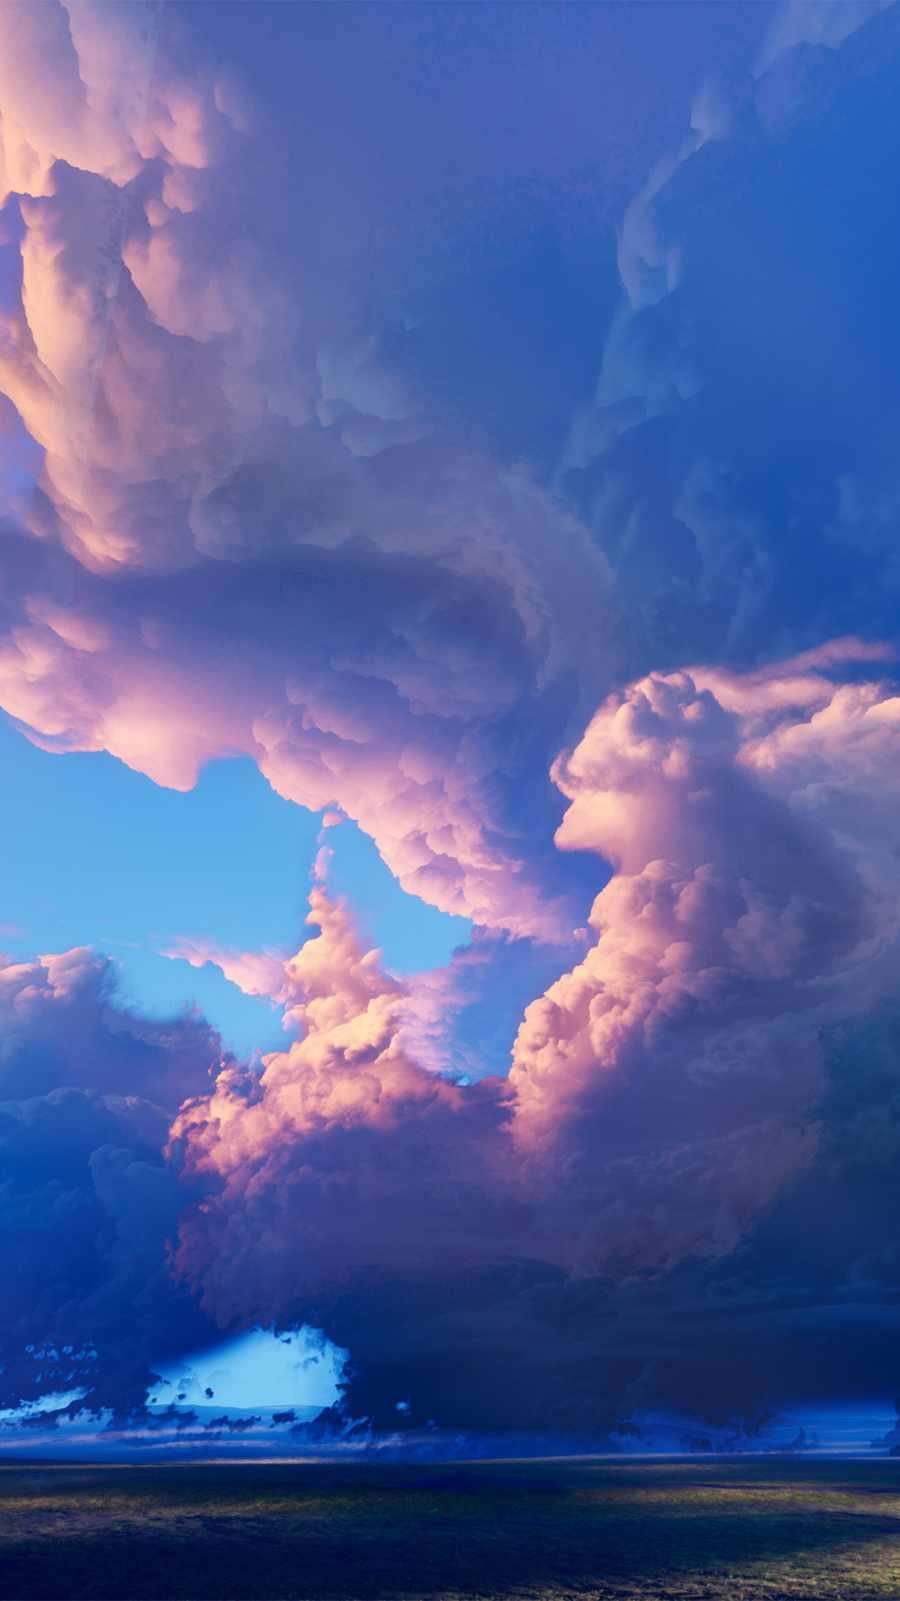 Cloudy Weather Images - Free Download on Freepik